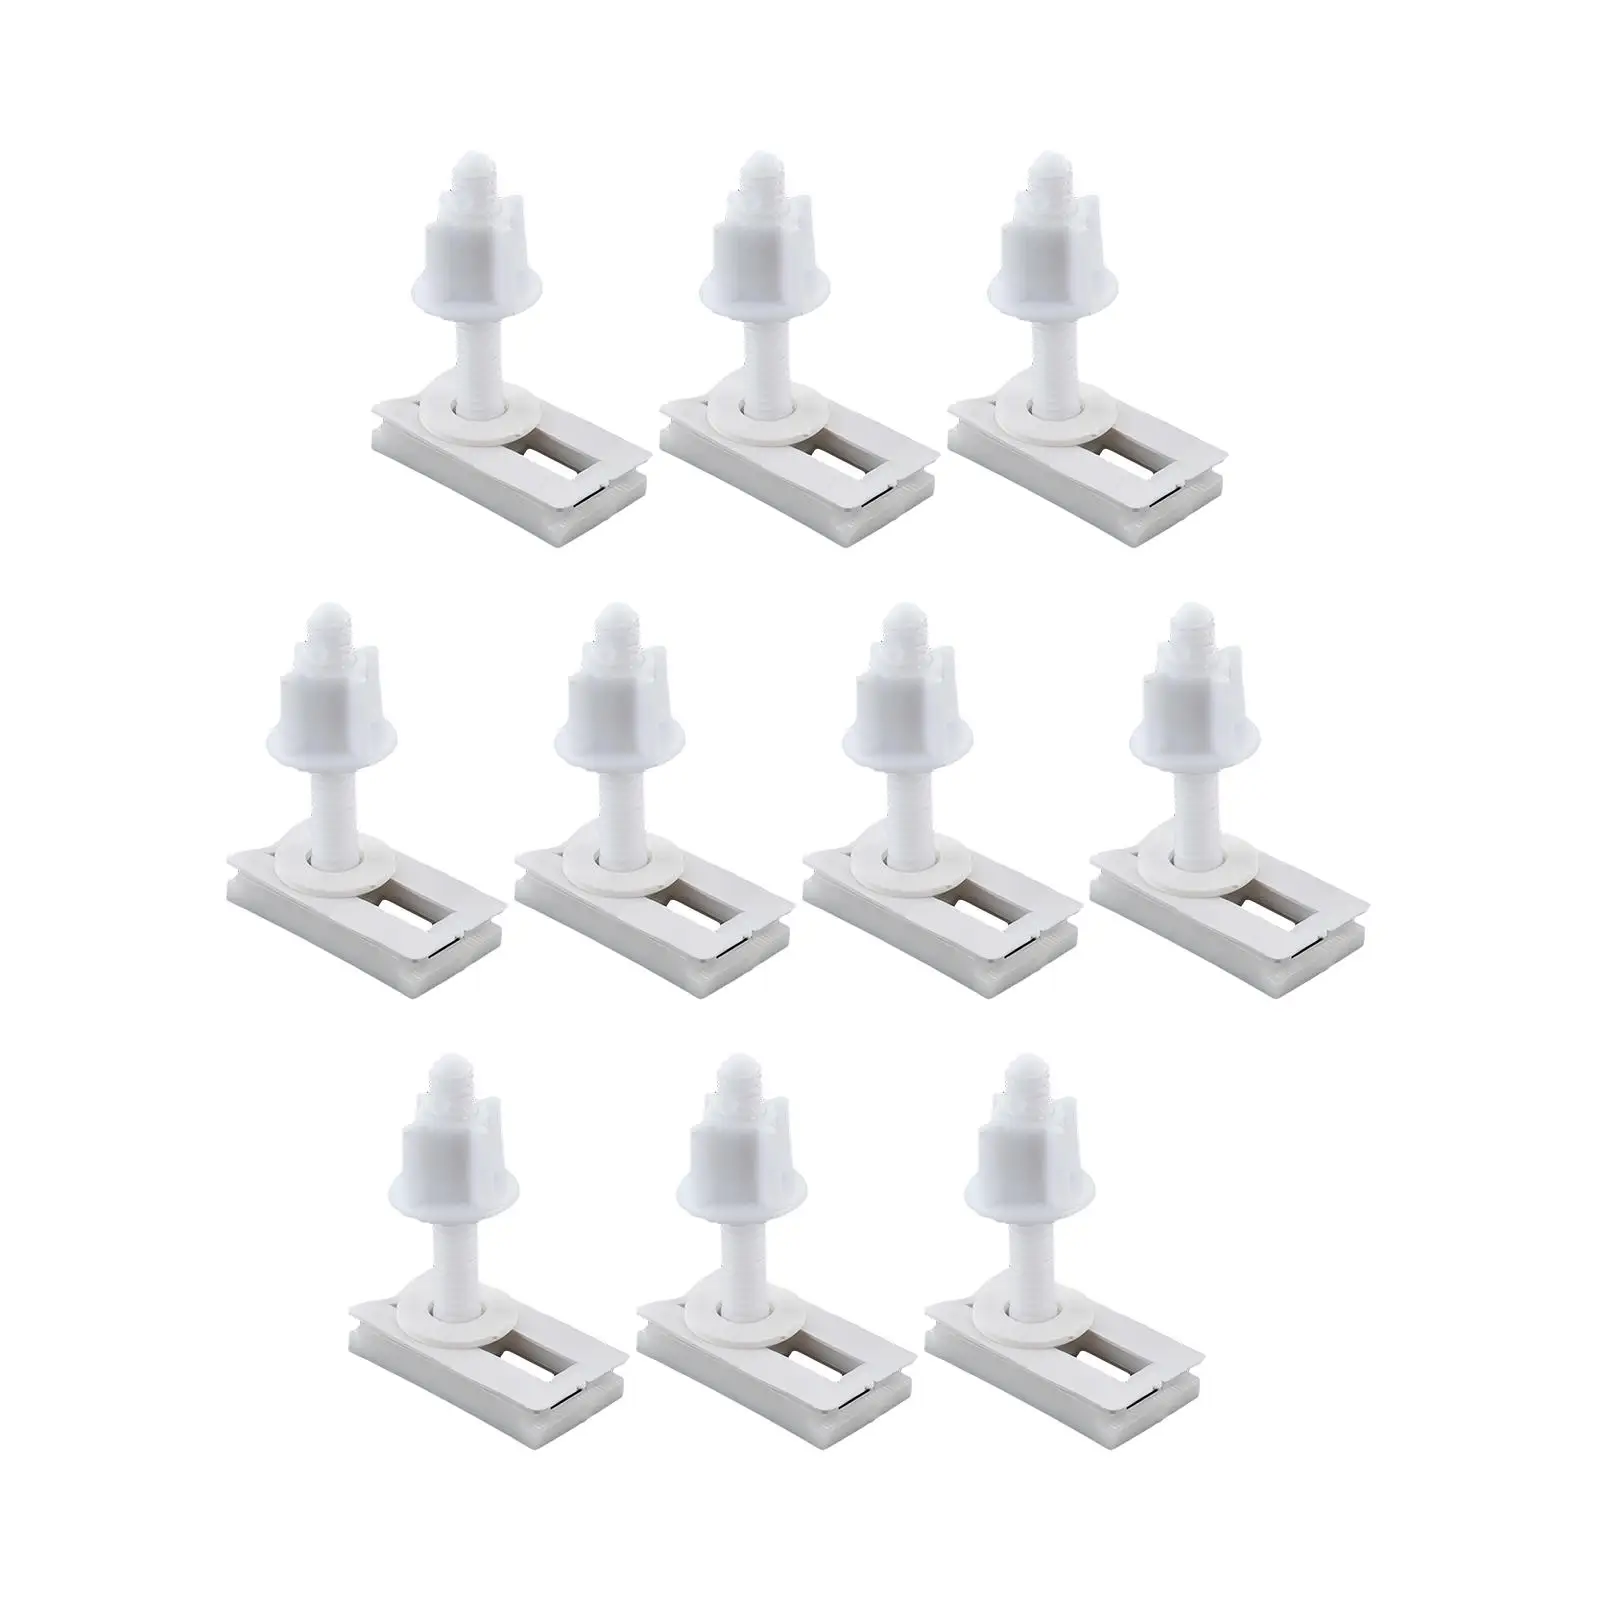 Toilet Seat Hinge Bolt Lightweight Toilet Seat Accessories 10Pcs Practical for Household Office Hotels Bathrooms Public Places